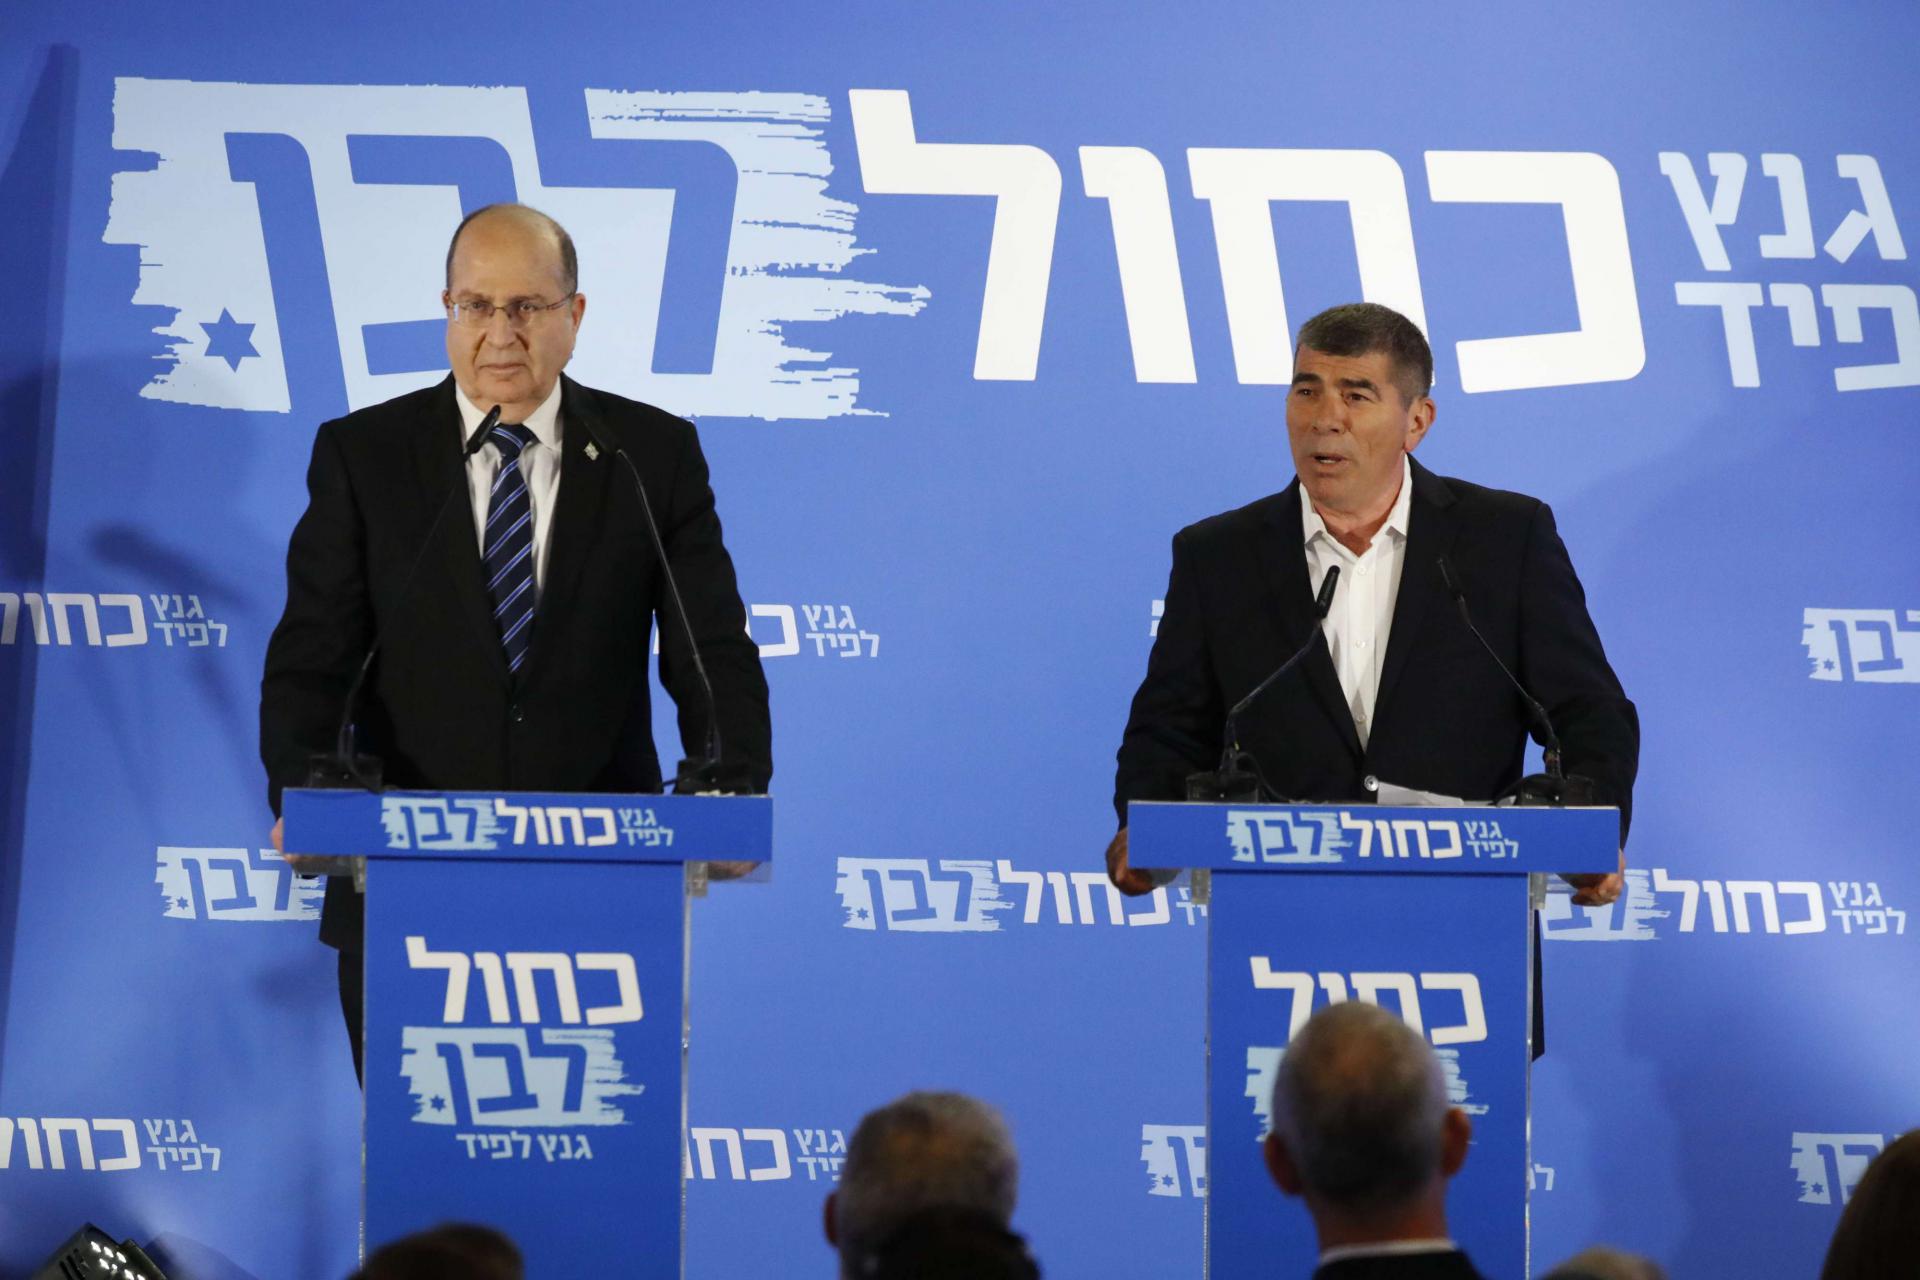 The alliance is expected to win the most seats ahead of Netanyahu's right-wing Likud, but not nearly enough for an outright victory